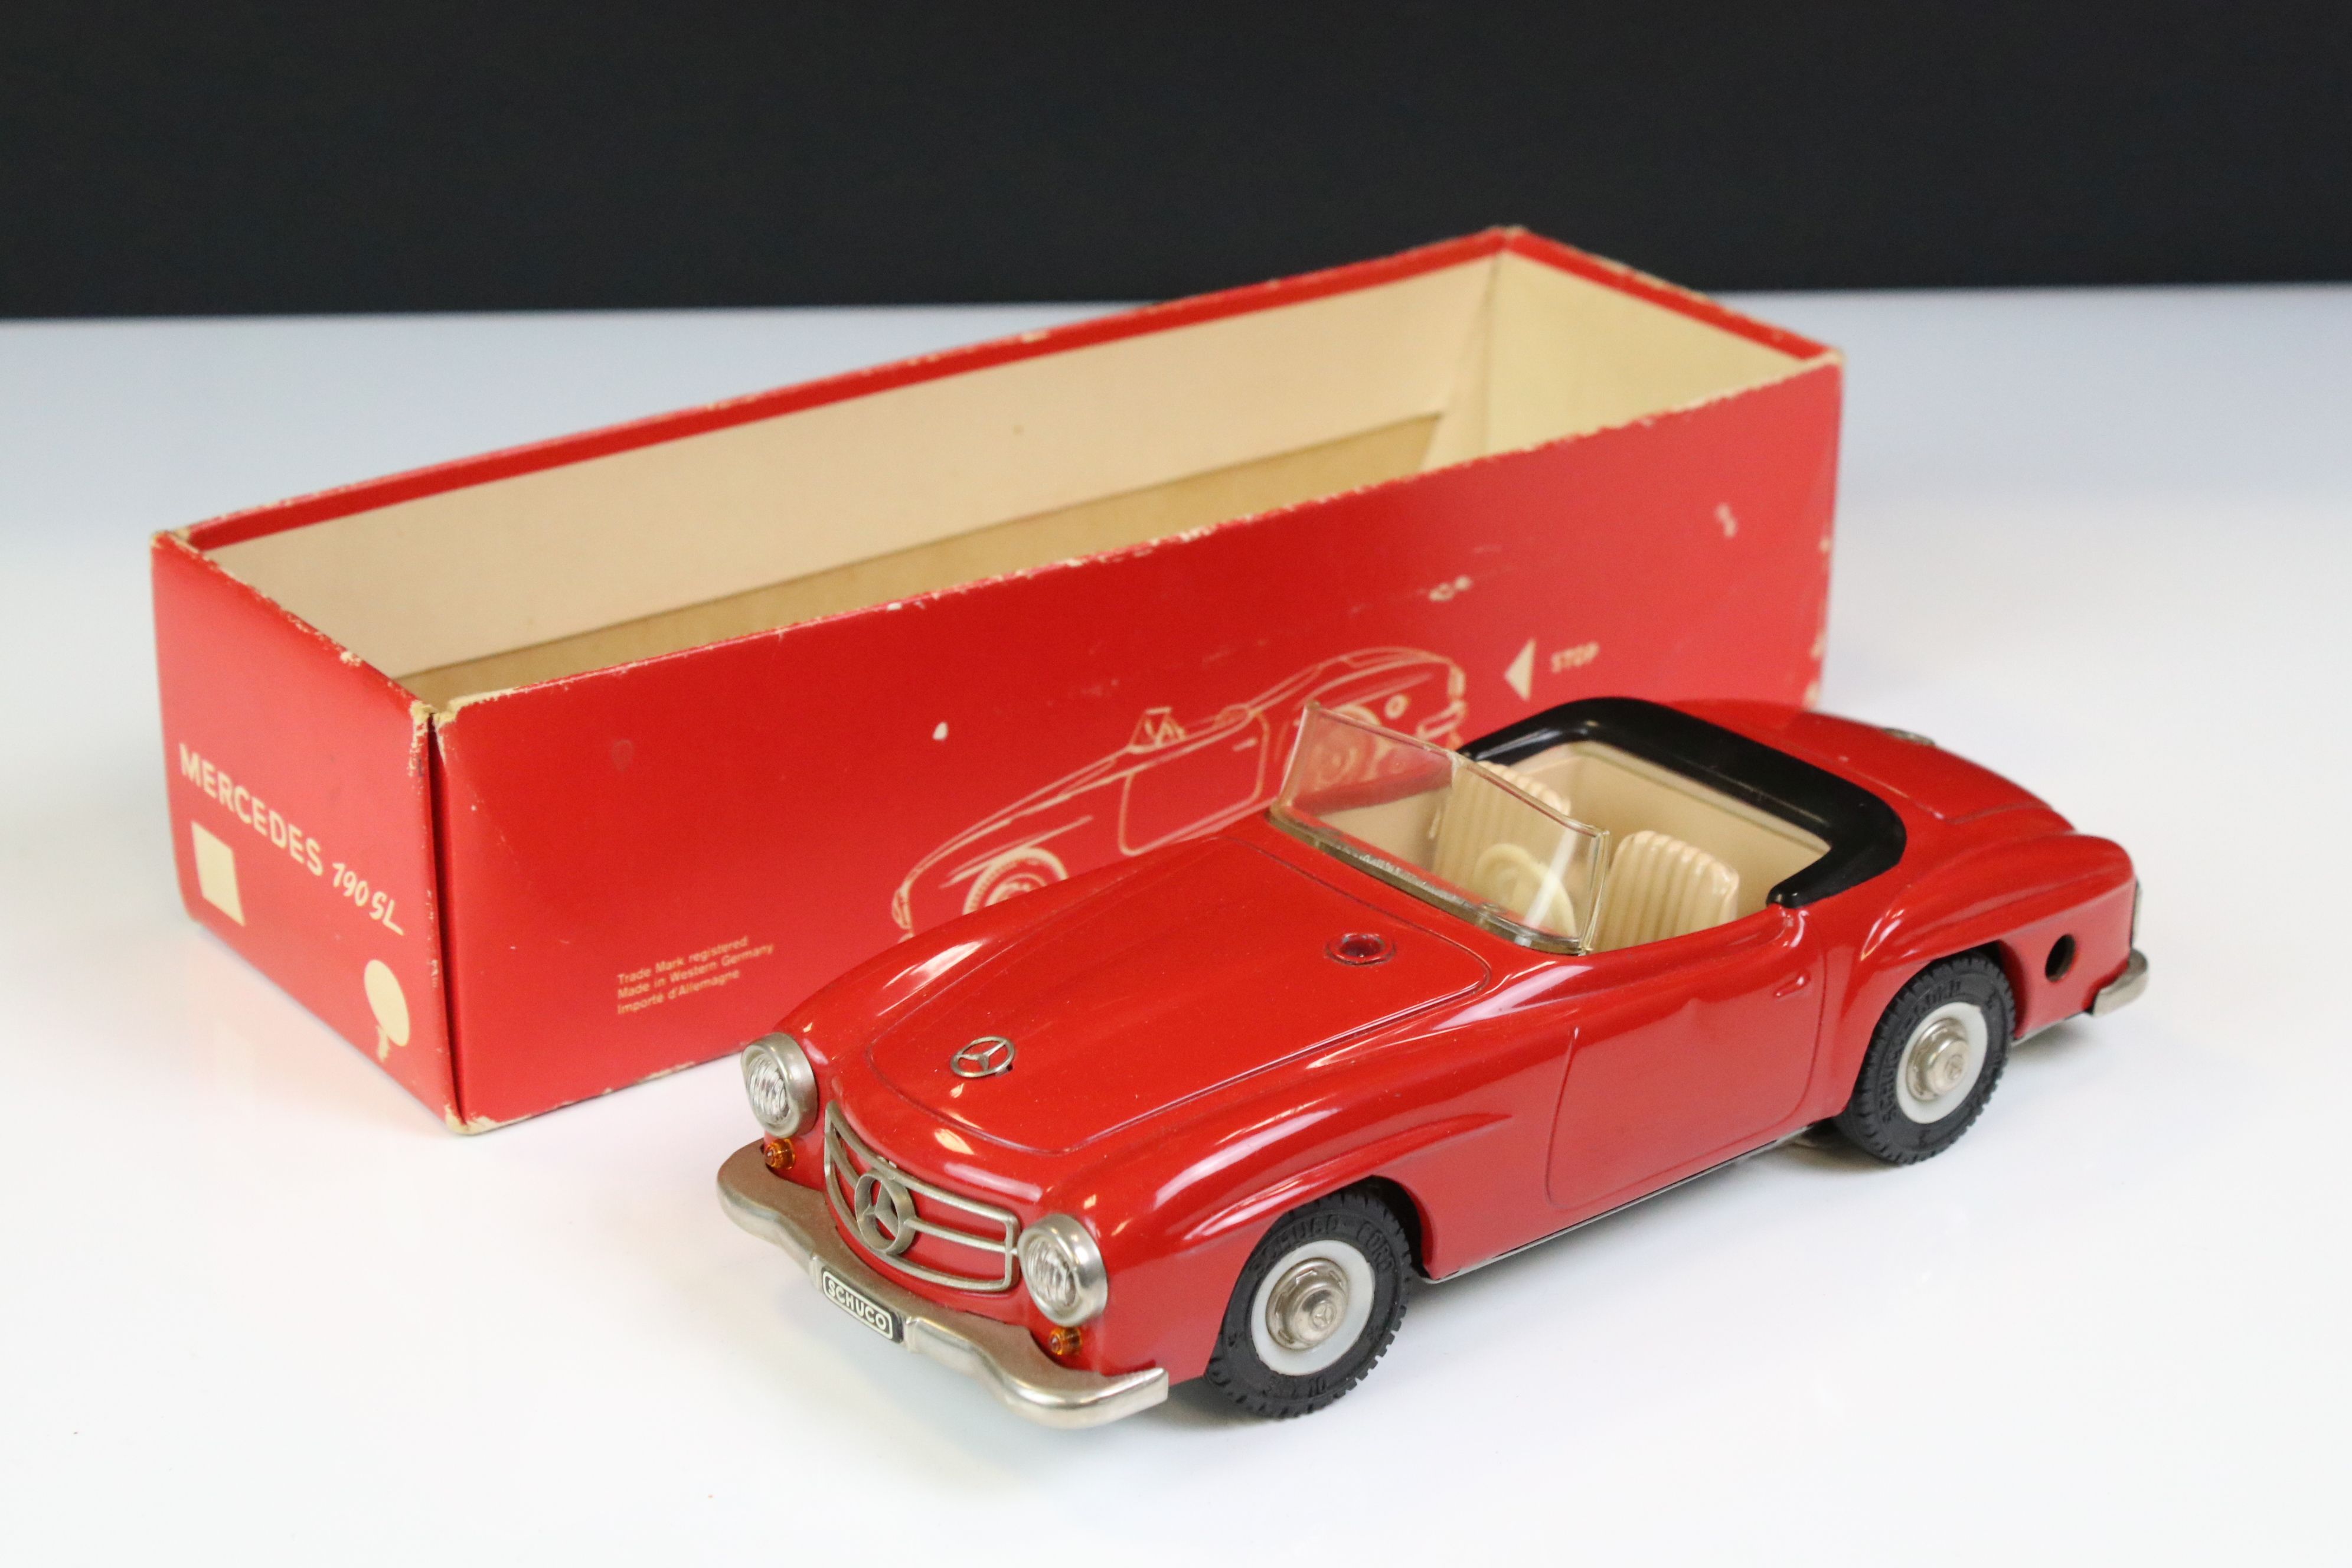 Schuco Clockwork tinplate remote control 2095 Mercedes 190 SL in red, with instructions and box tray